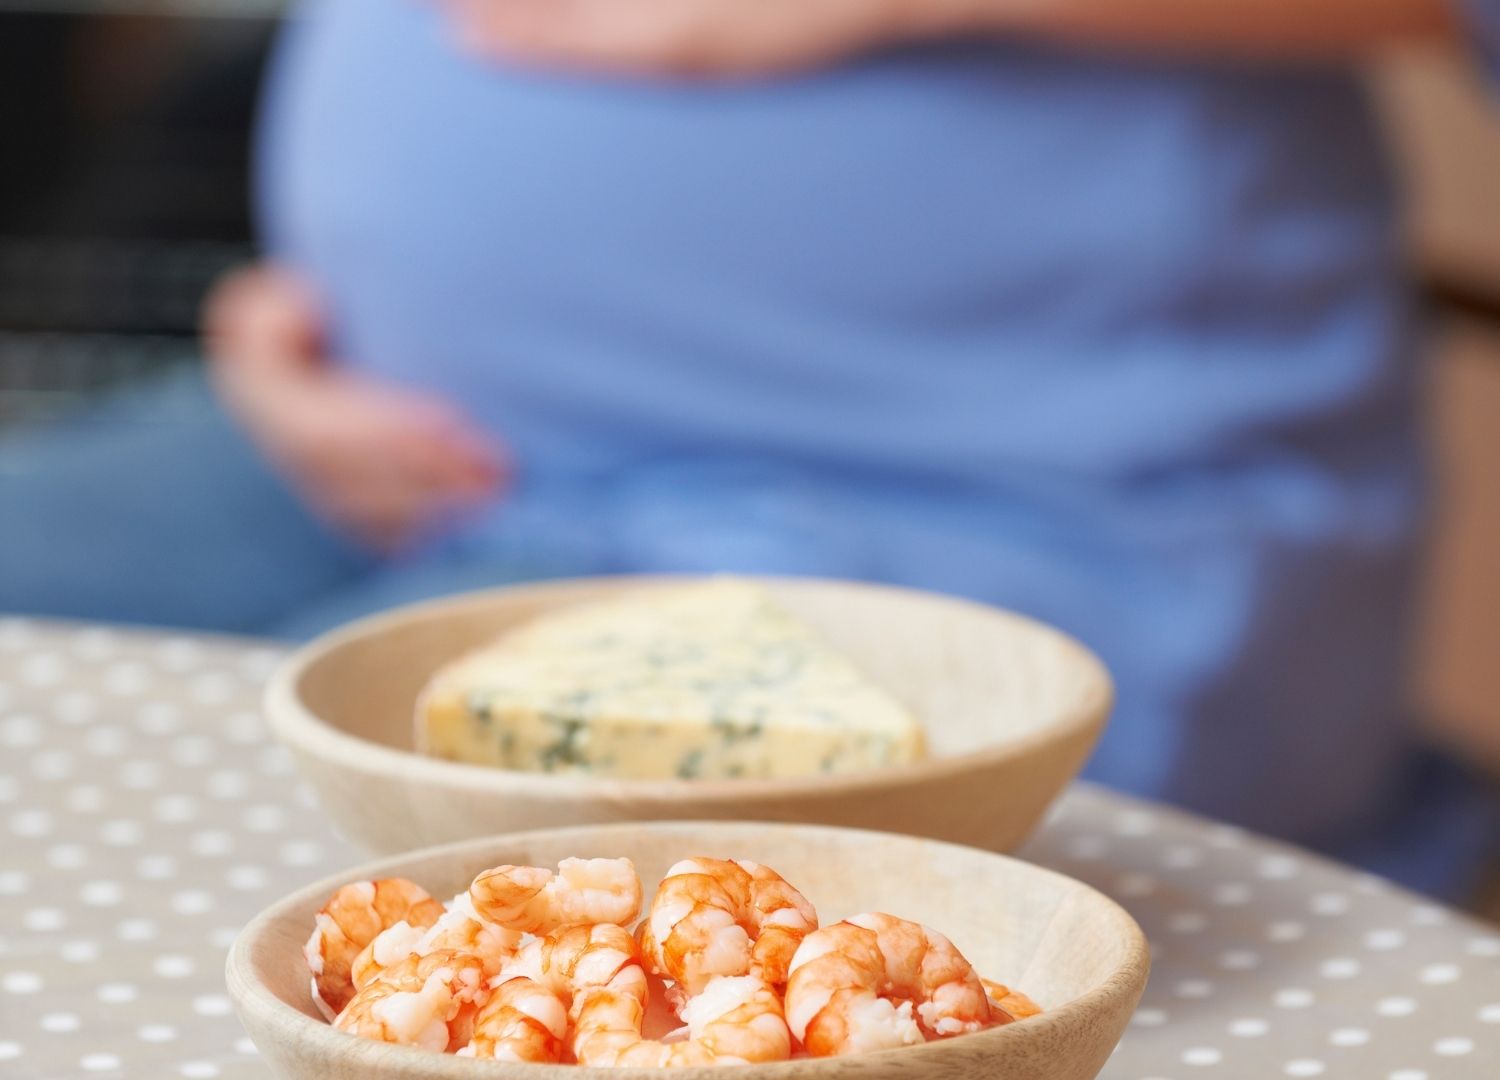 Foods to avoid in Pregnancy